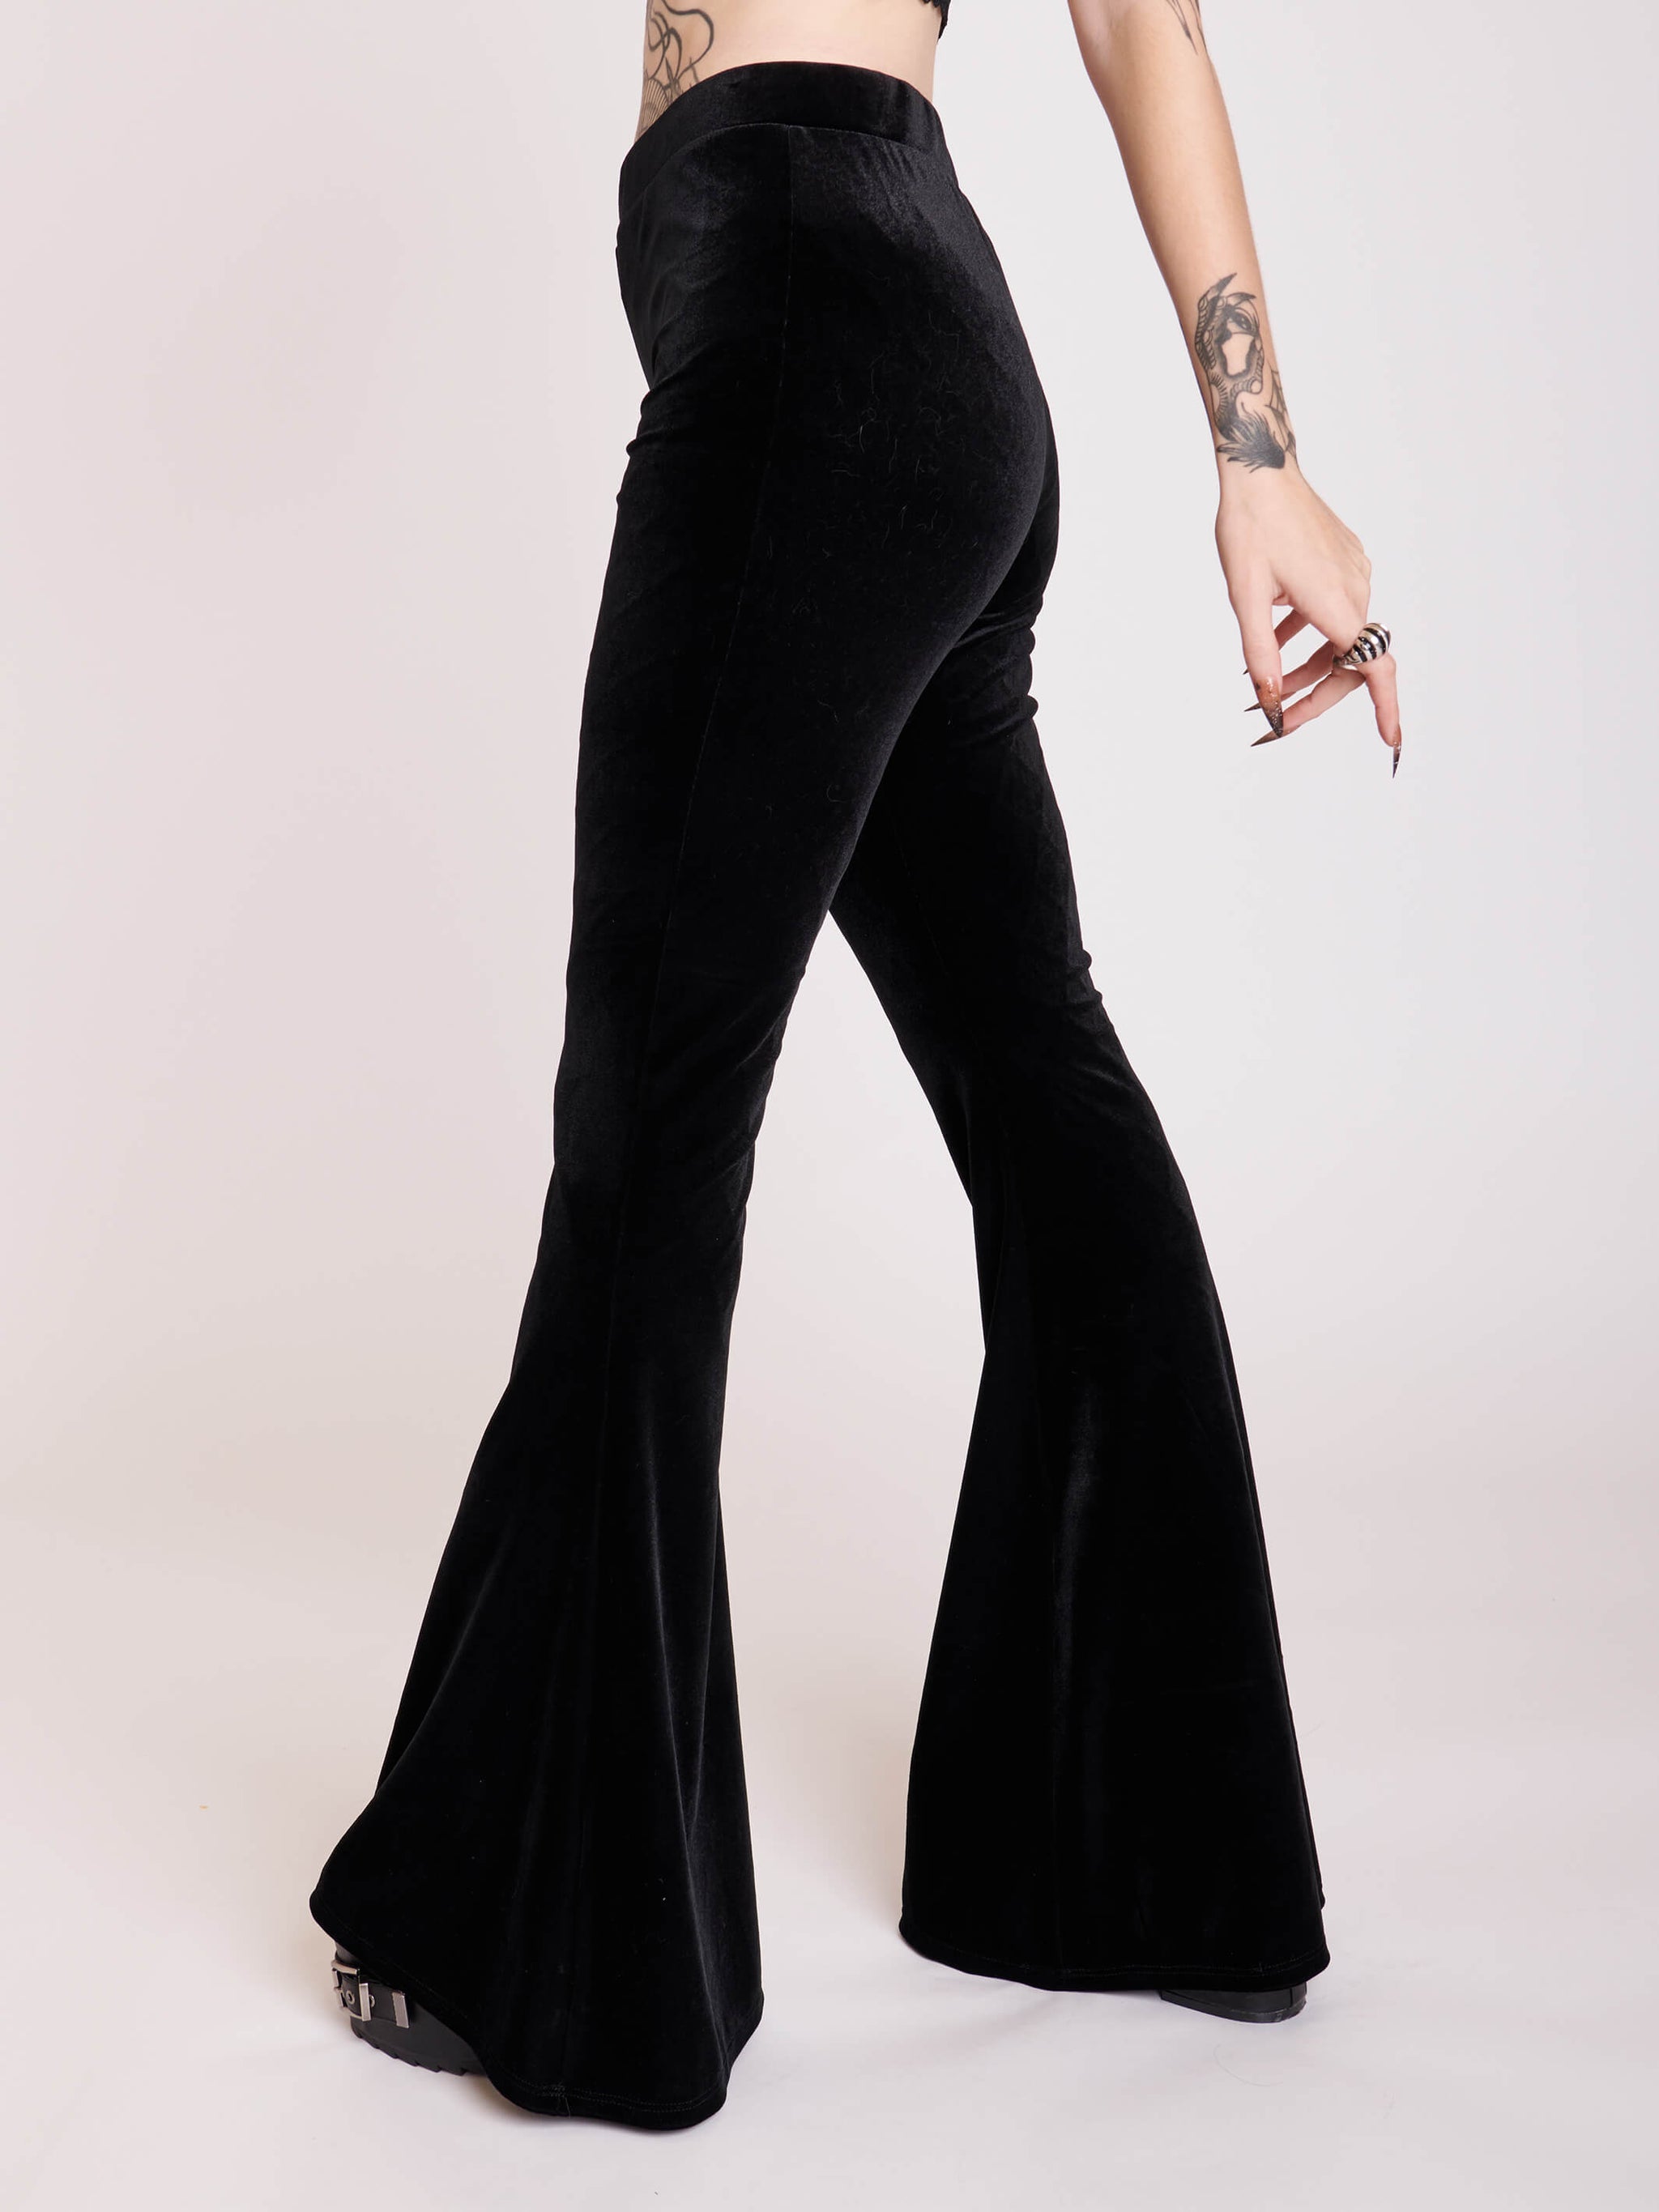 Caged Sexy Cut-Out Bell Bottom Dance Pants | MYZIJI DANCE FITNESS